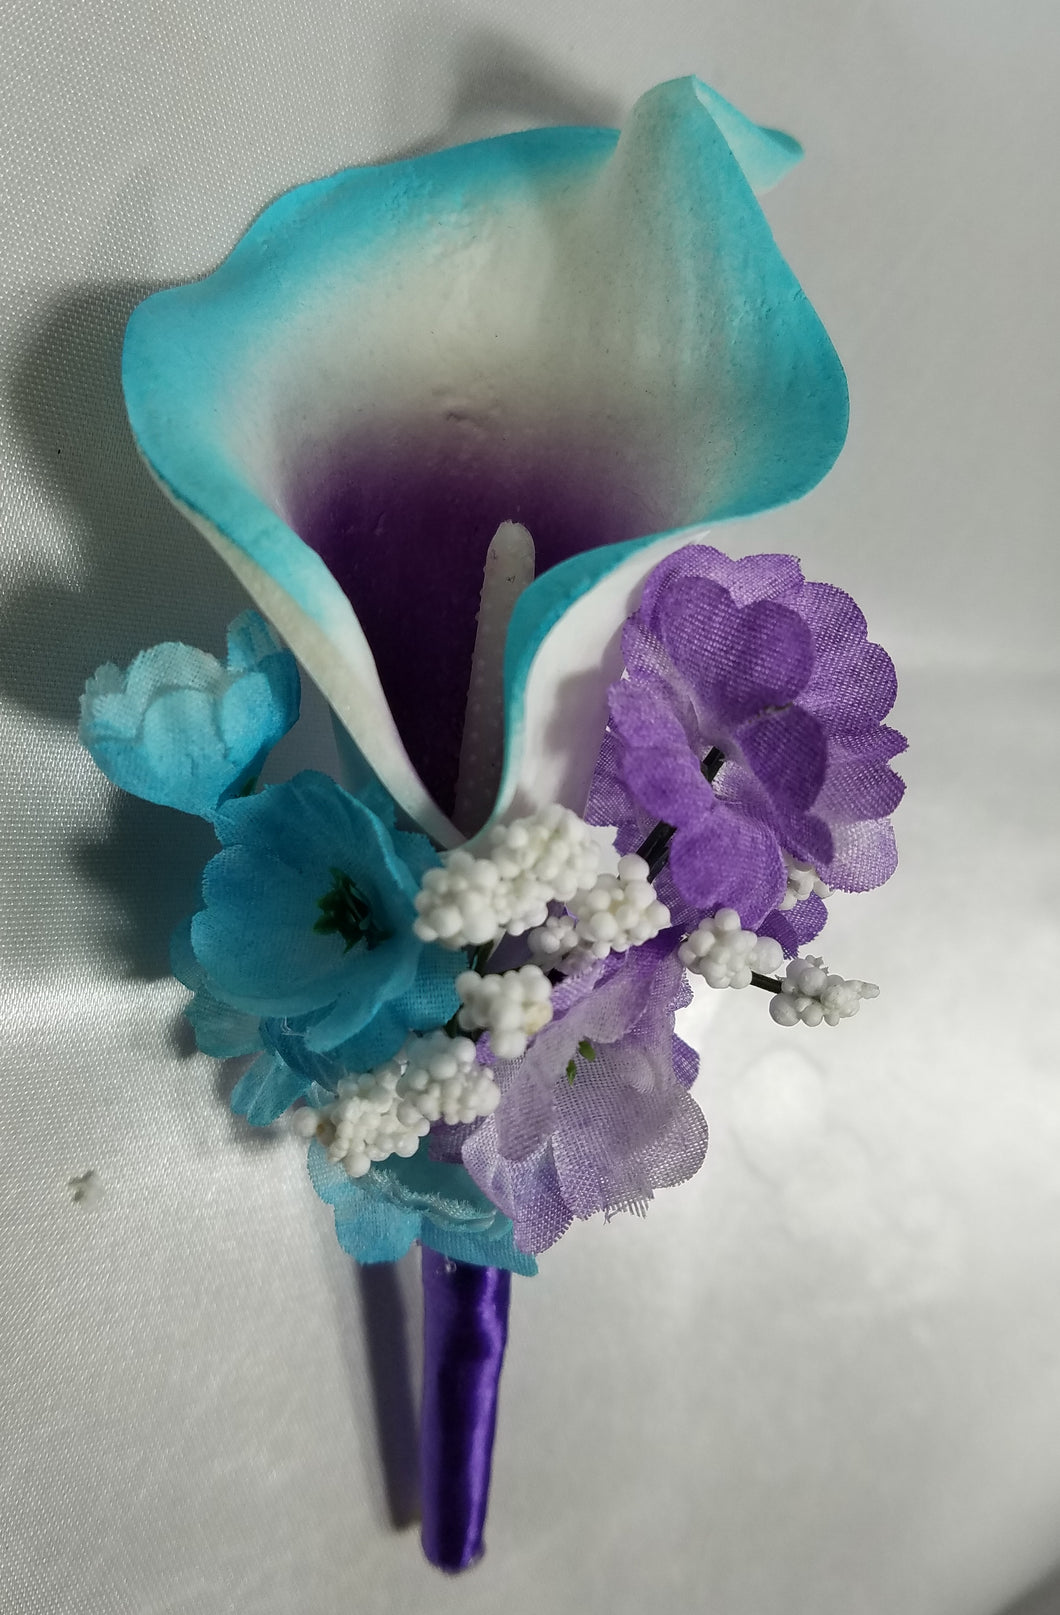 Purple Teal Rose Calla Lily Bridal Wedding Bouquet Accessories